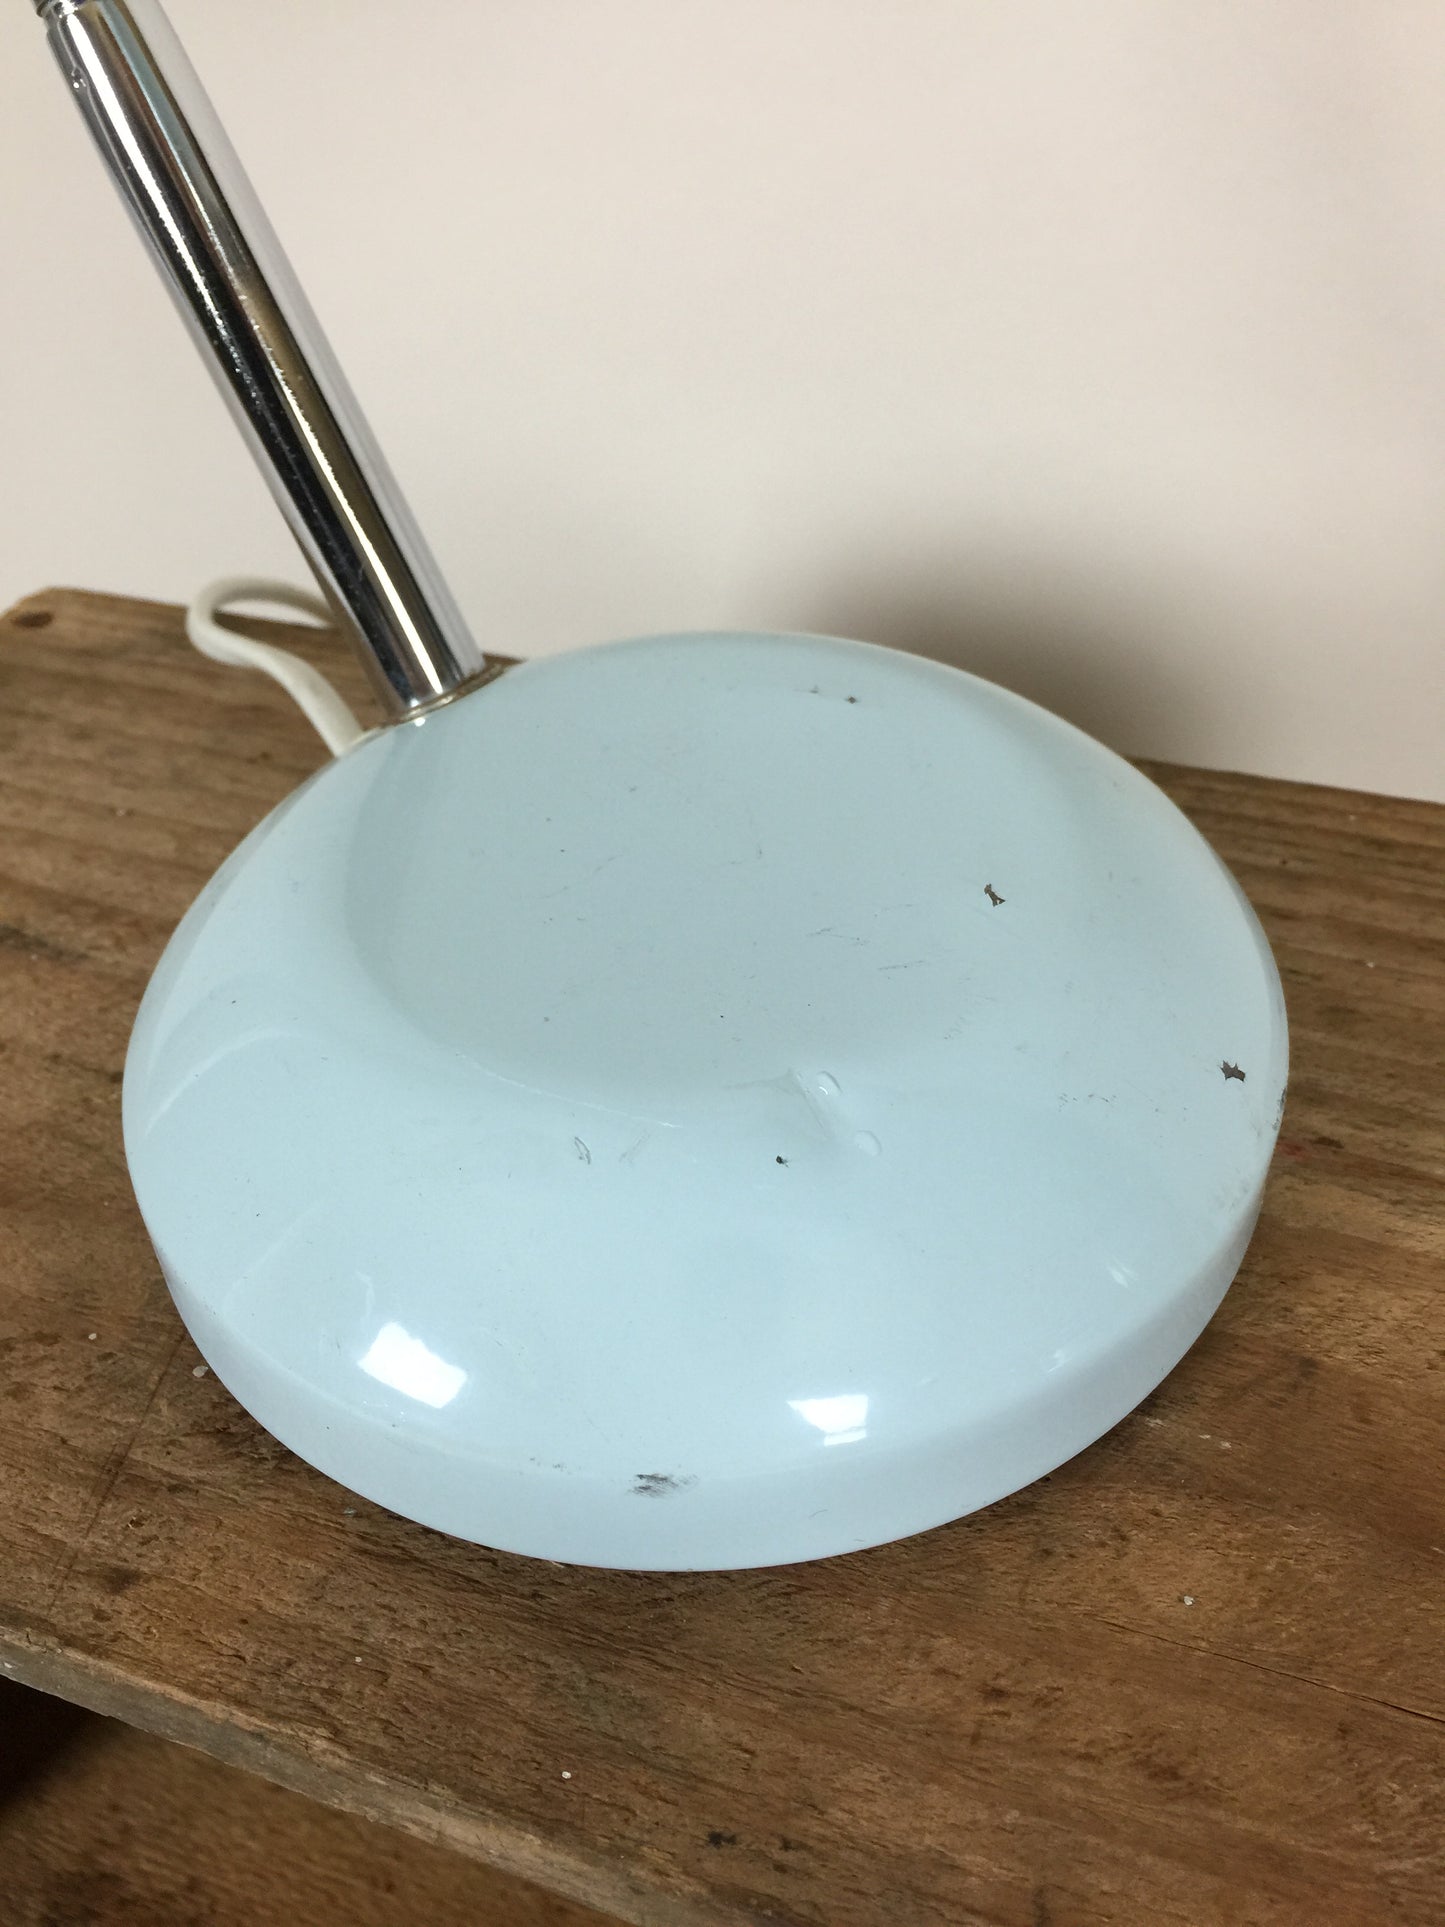 Fin lille lampe med patina